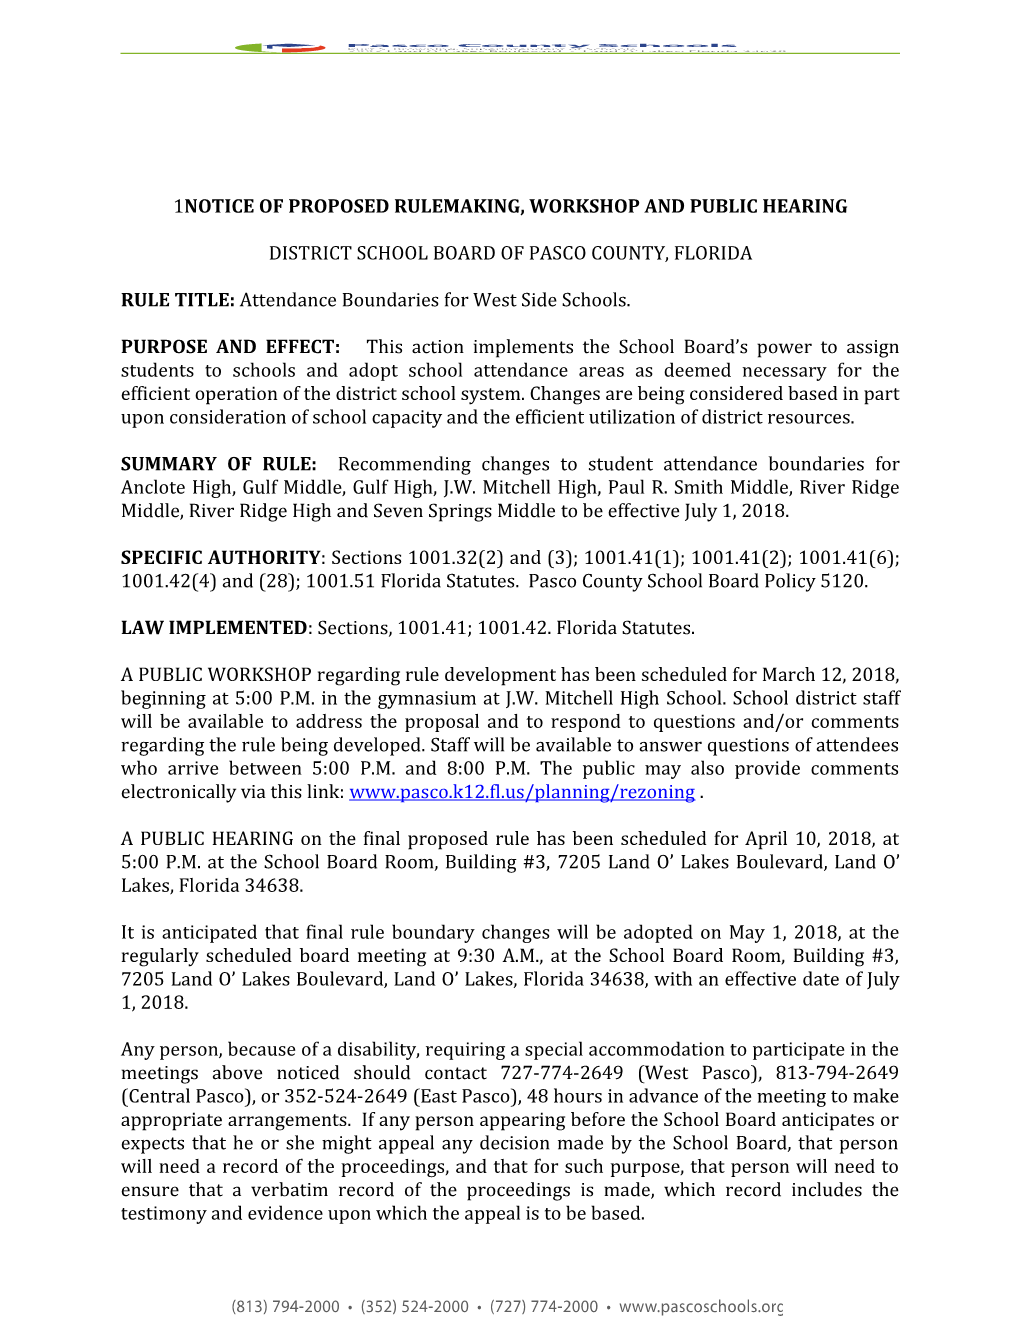 Notice of Proposed Rulemaking, Workshop and Public Hearing